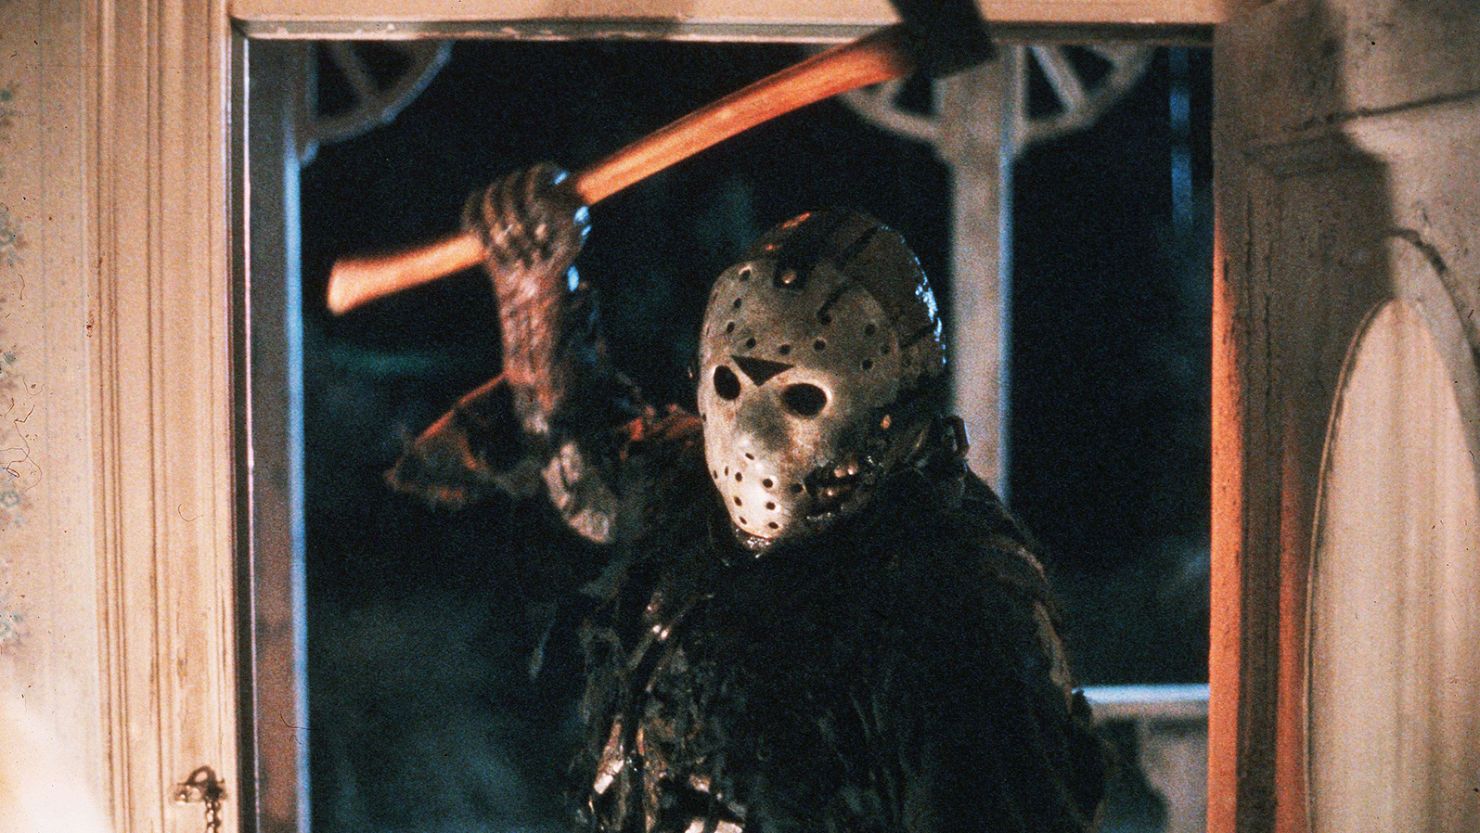 A contentious court battle has left the "Friday the 13th" franchise -- about killer Jason Voorhees, seen here in "Friday The 13th Part VII: The New Blood" -- in limbo for half a decade.